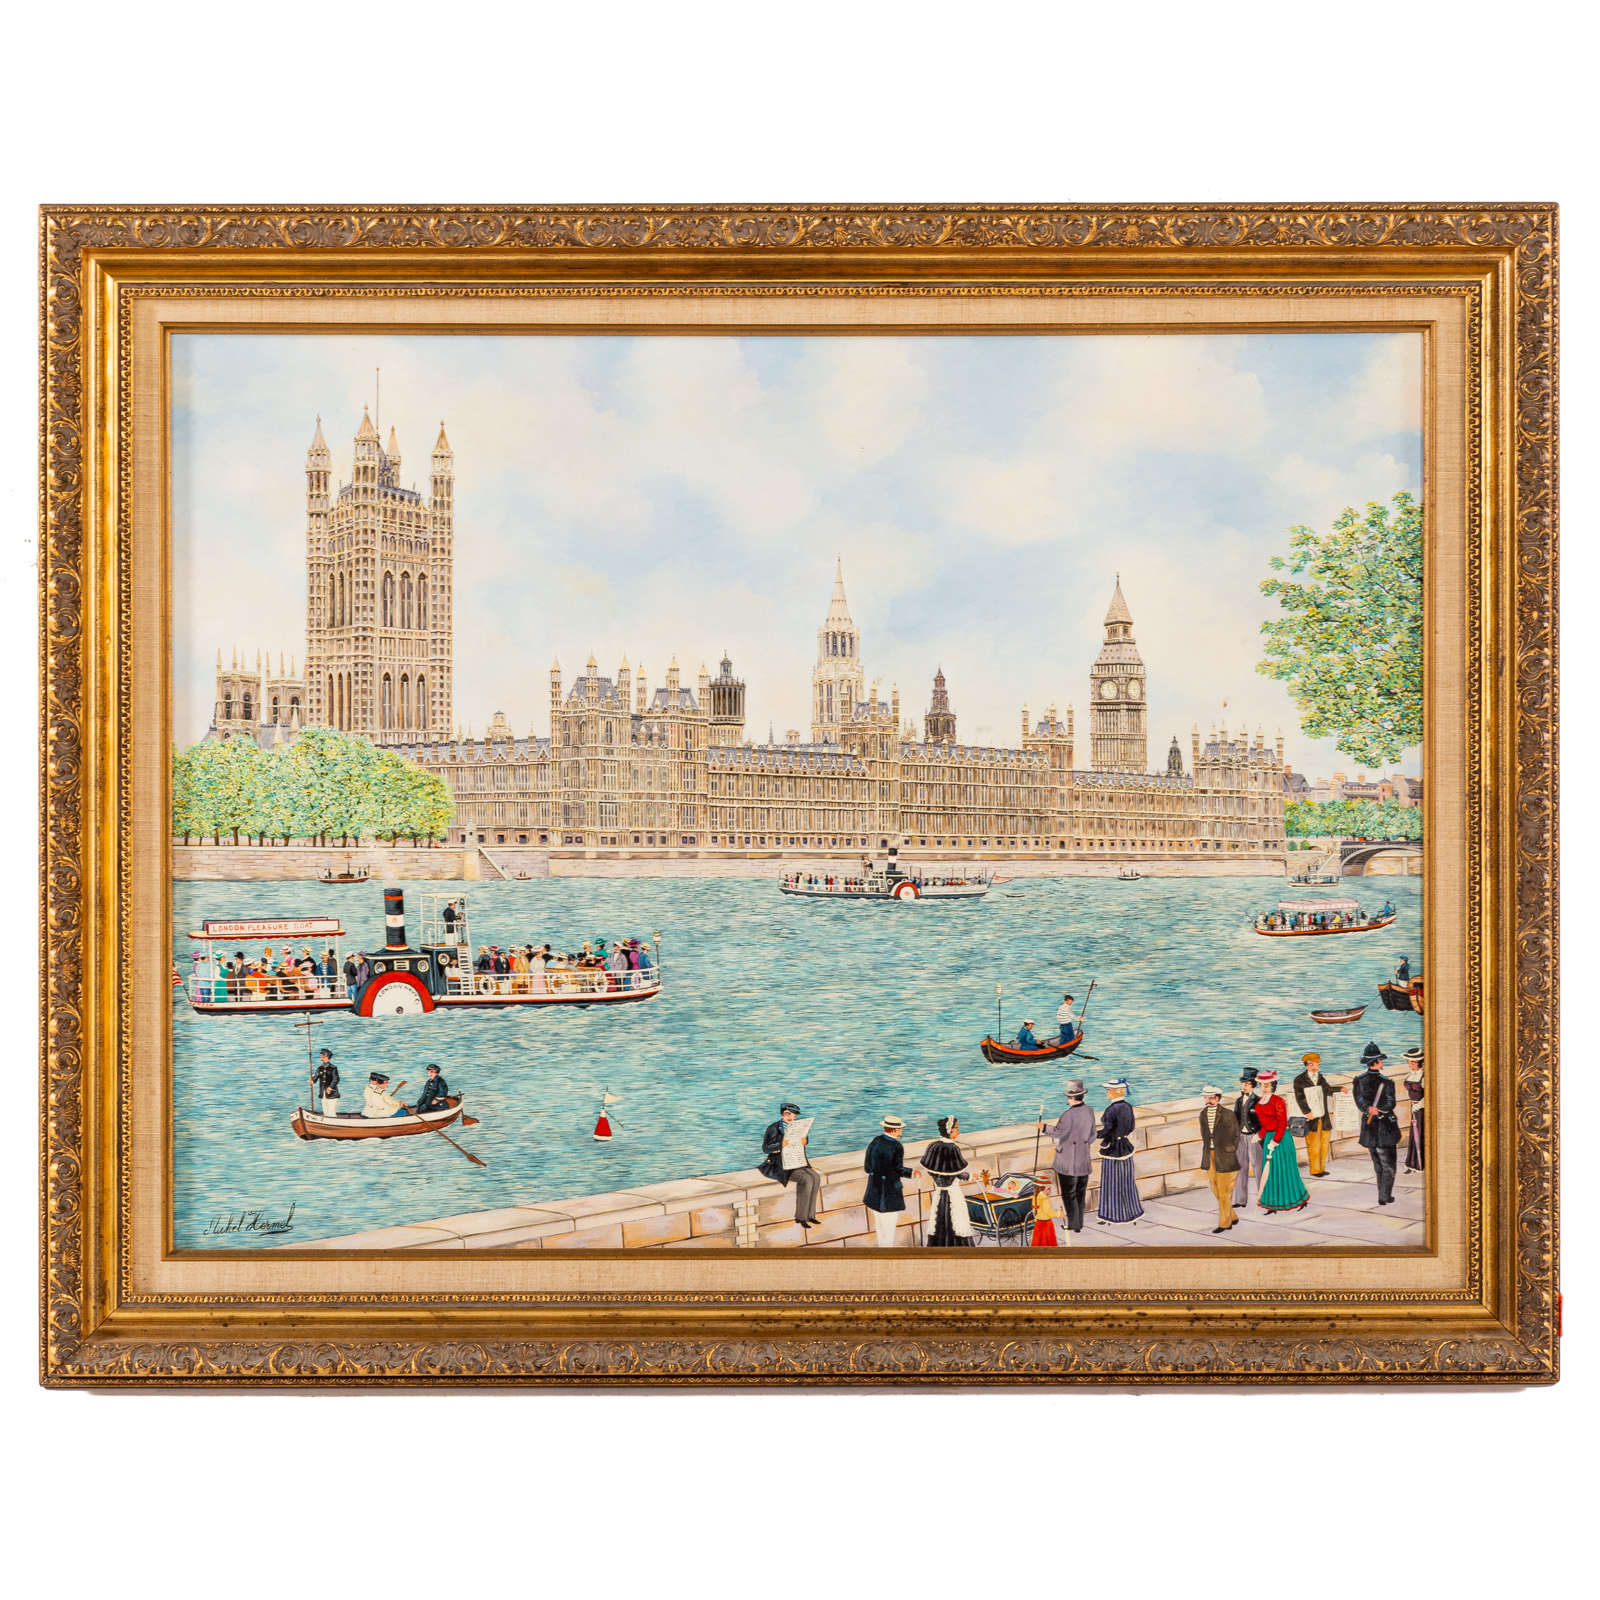 MICHEL HERMEL. PALACE OF WESTMINSTER,